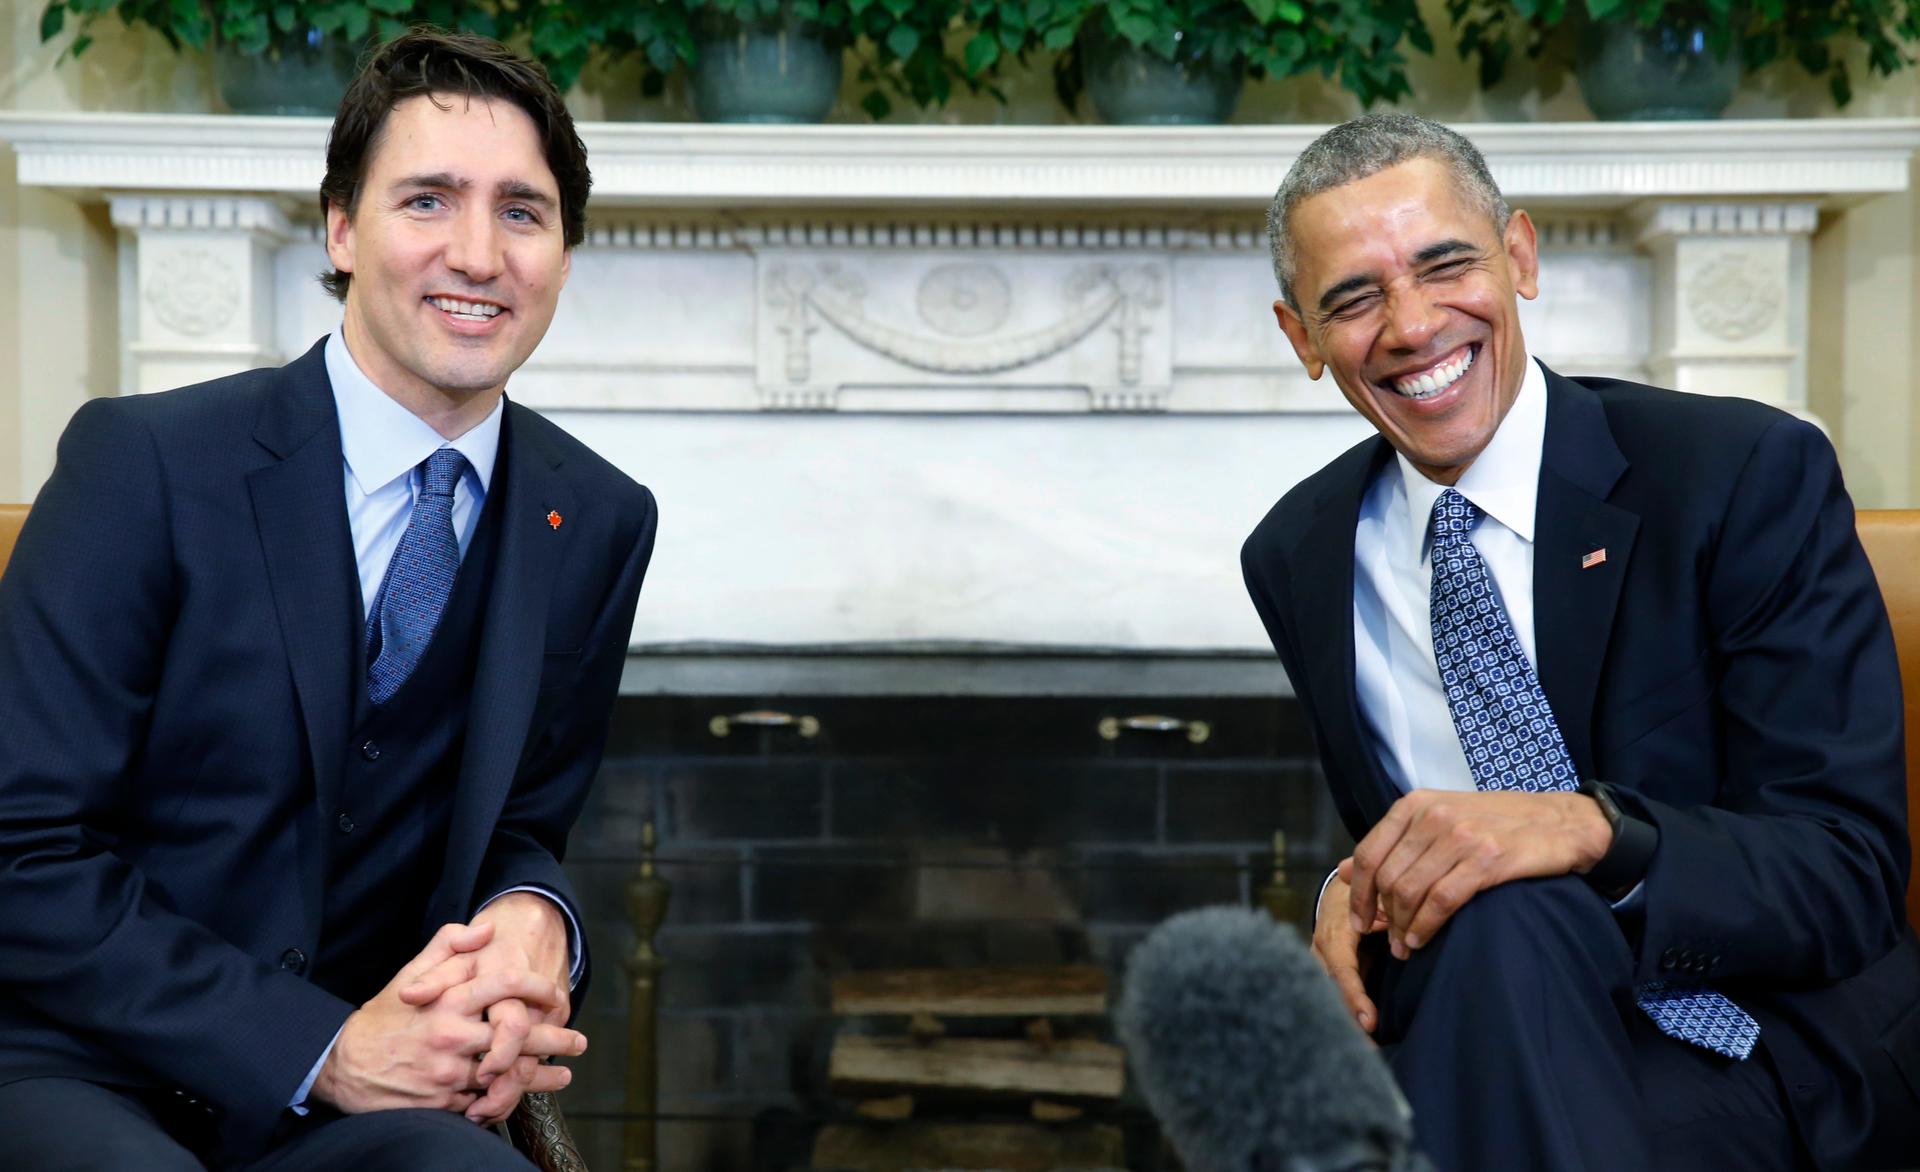 President Barack Obama meets with Canadian Prime Minister Justin Trudeau in the Oval Office of the White House in Washington March 10, 2016.